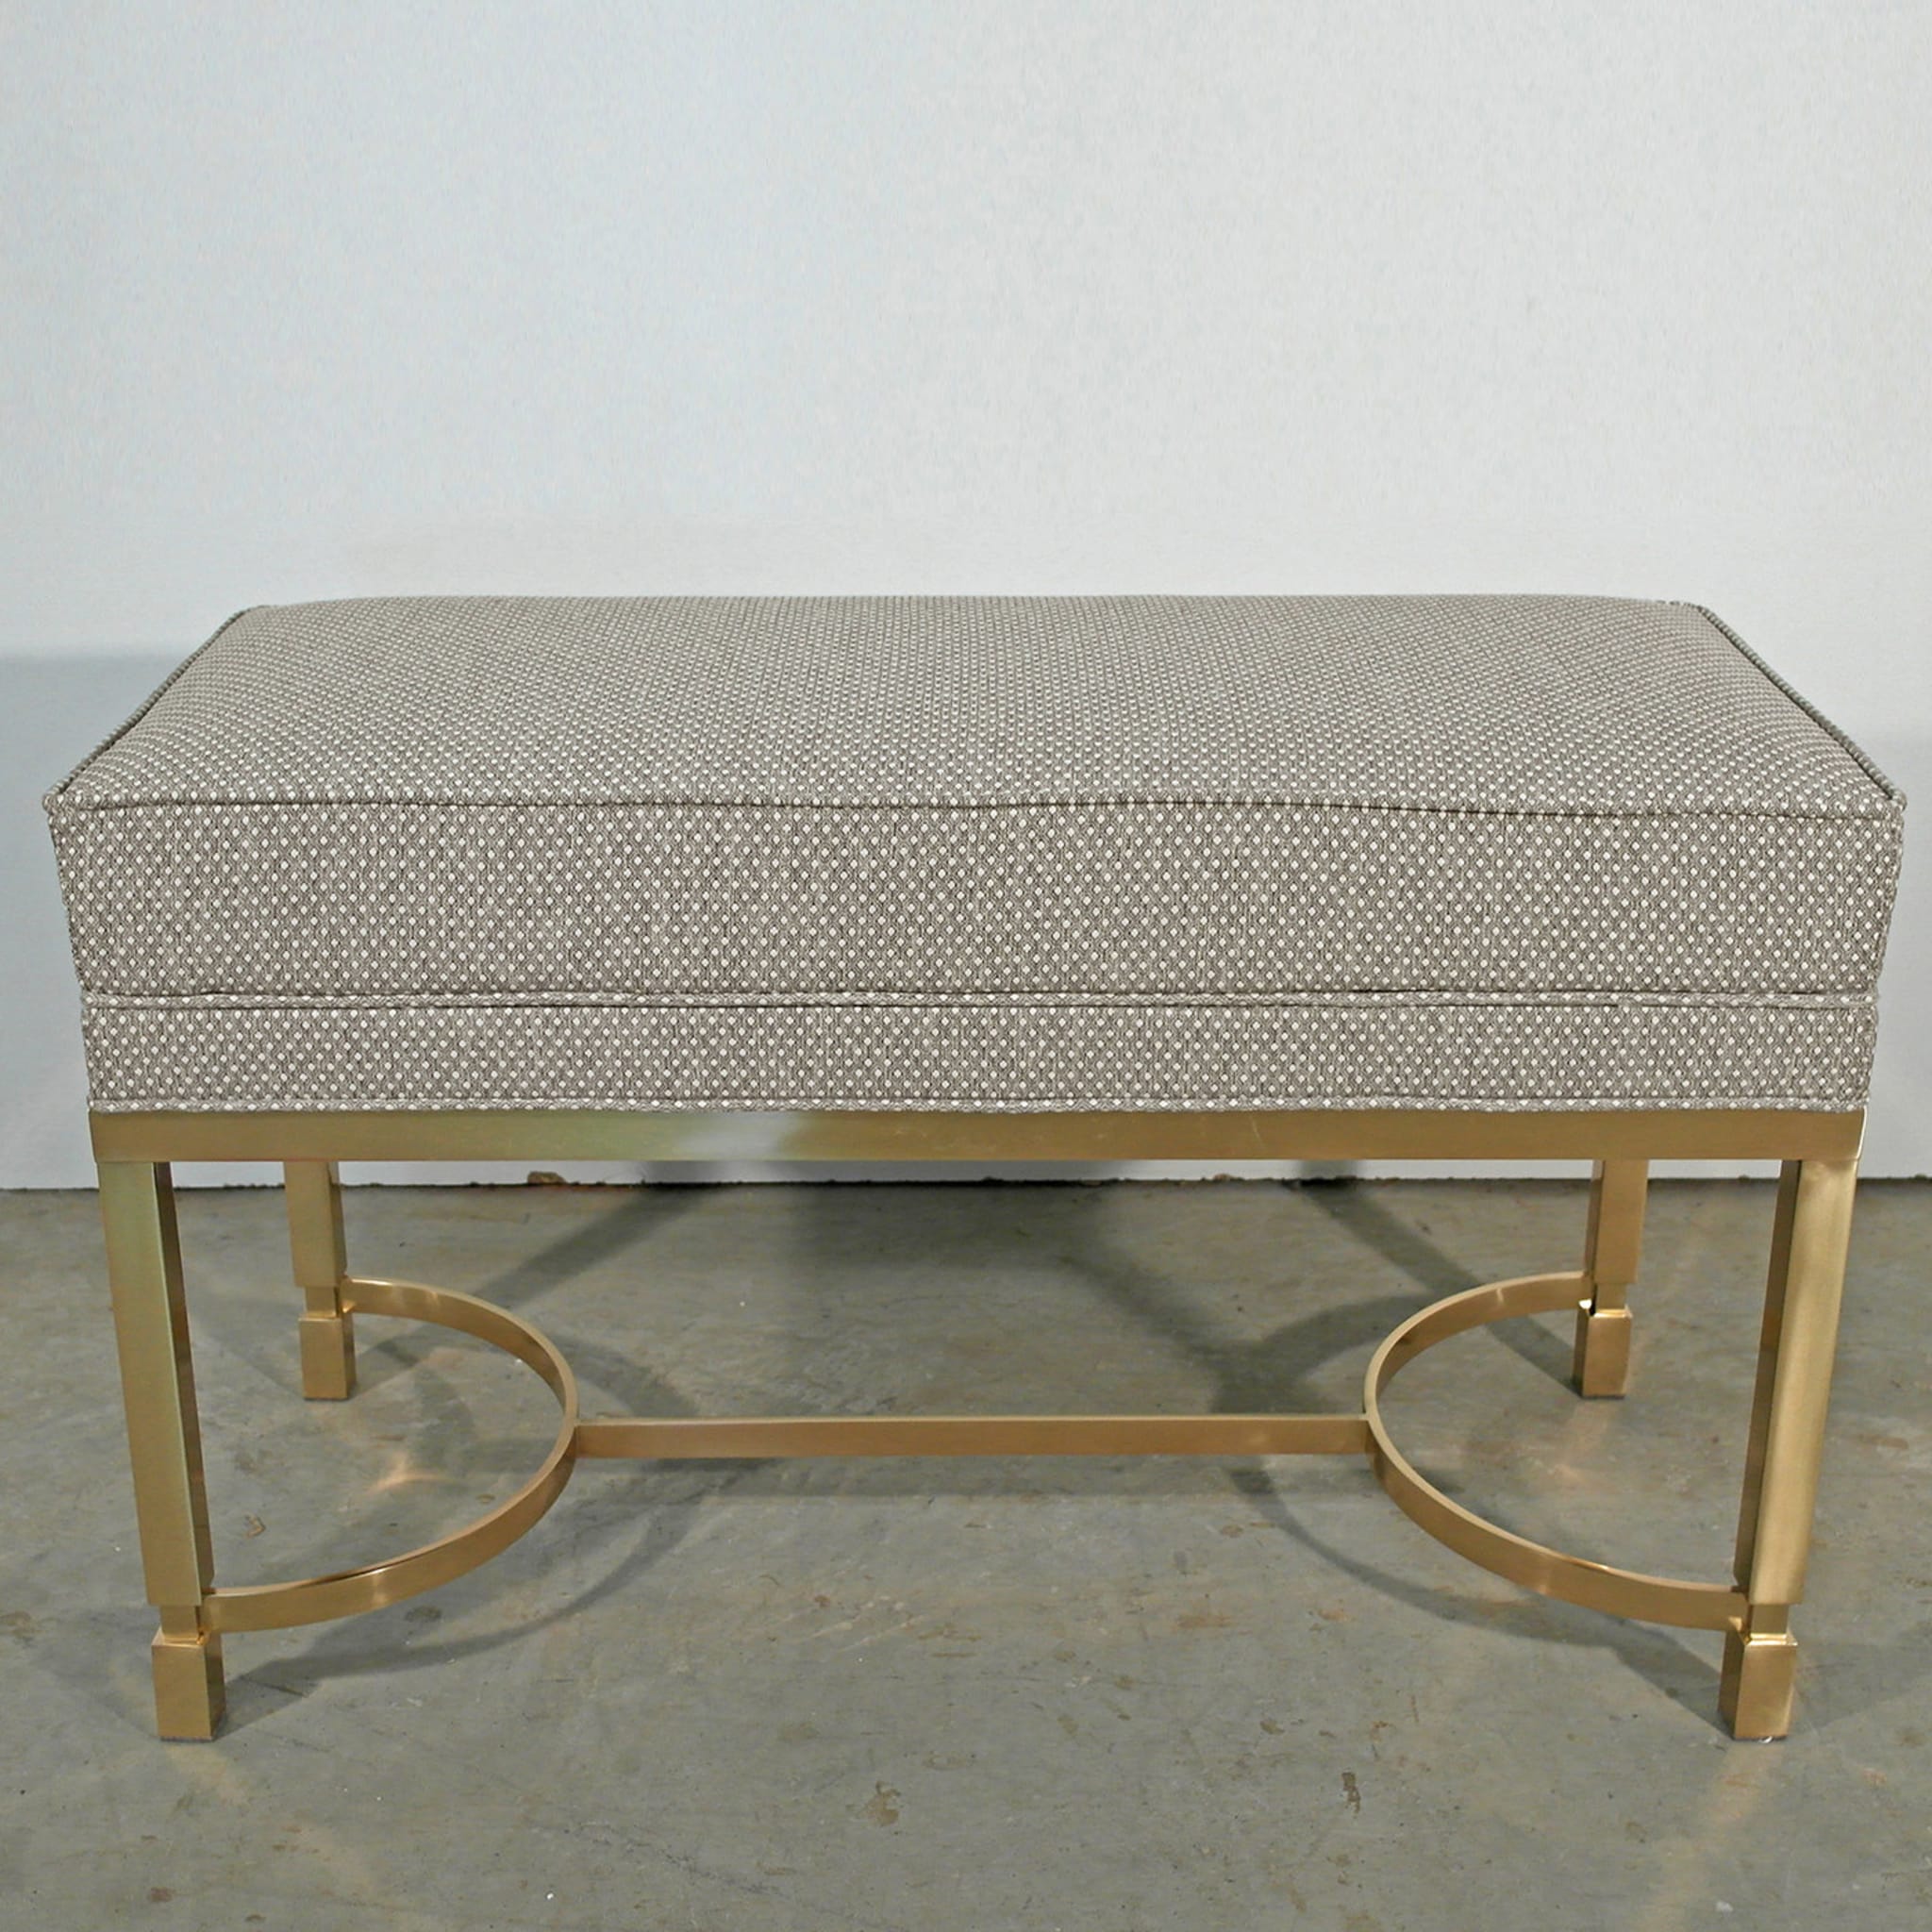 Two-Tone Upholstered Bench - Alternative view 1